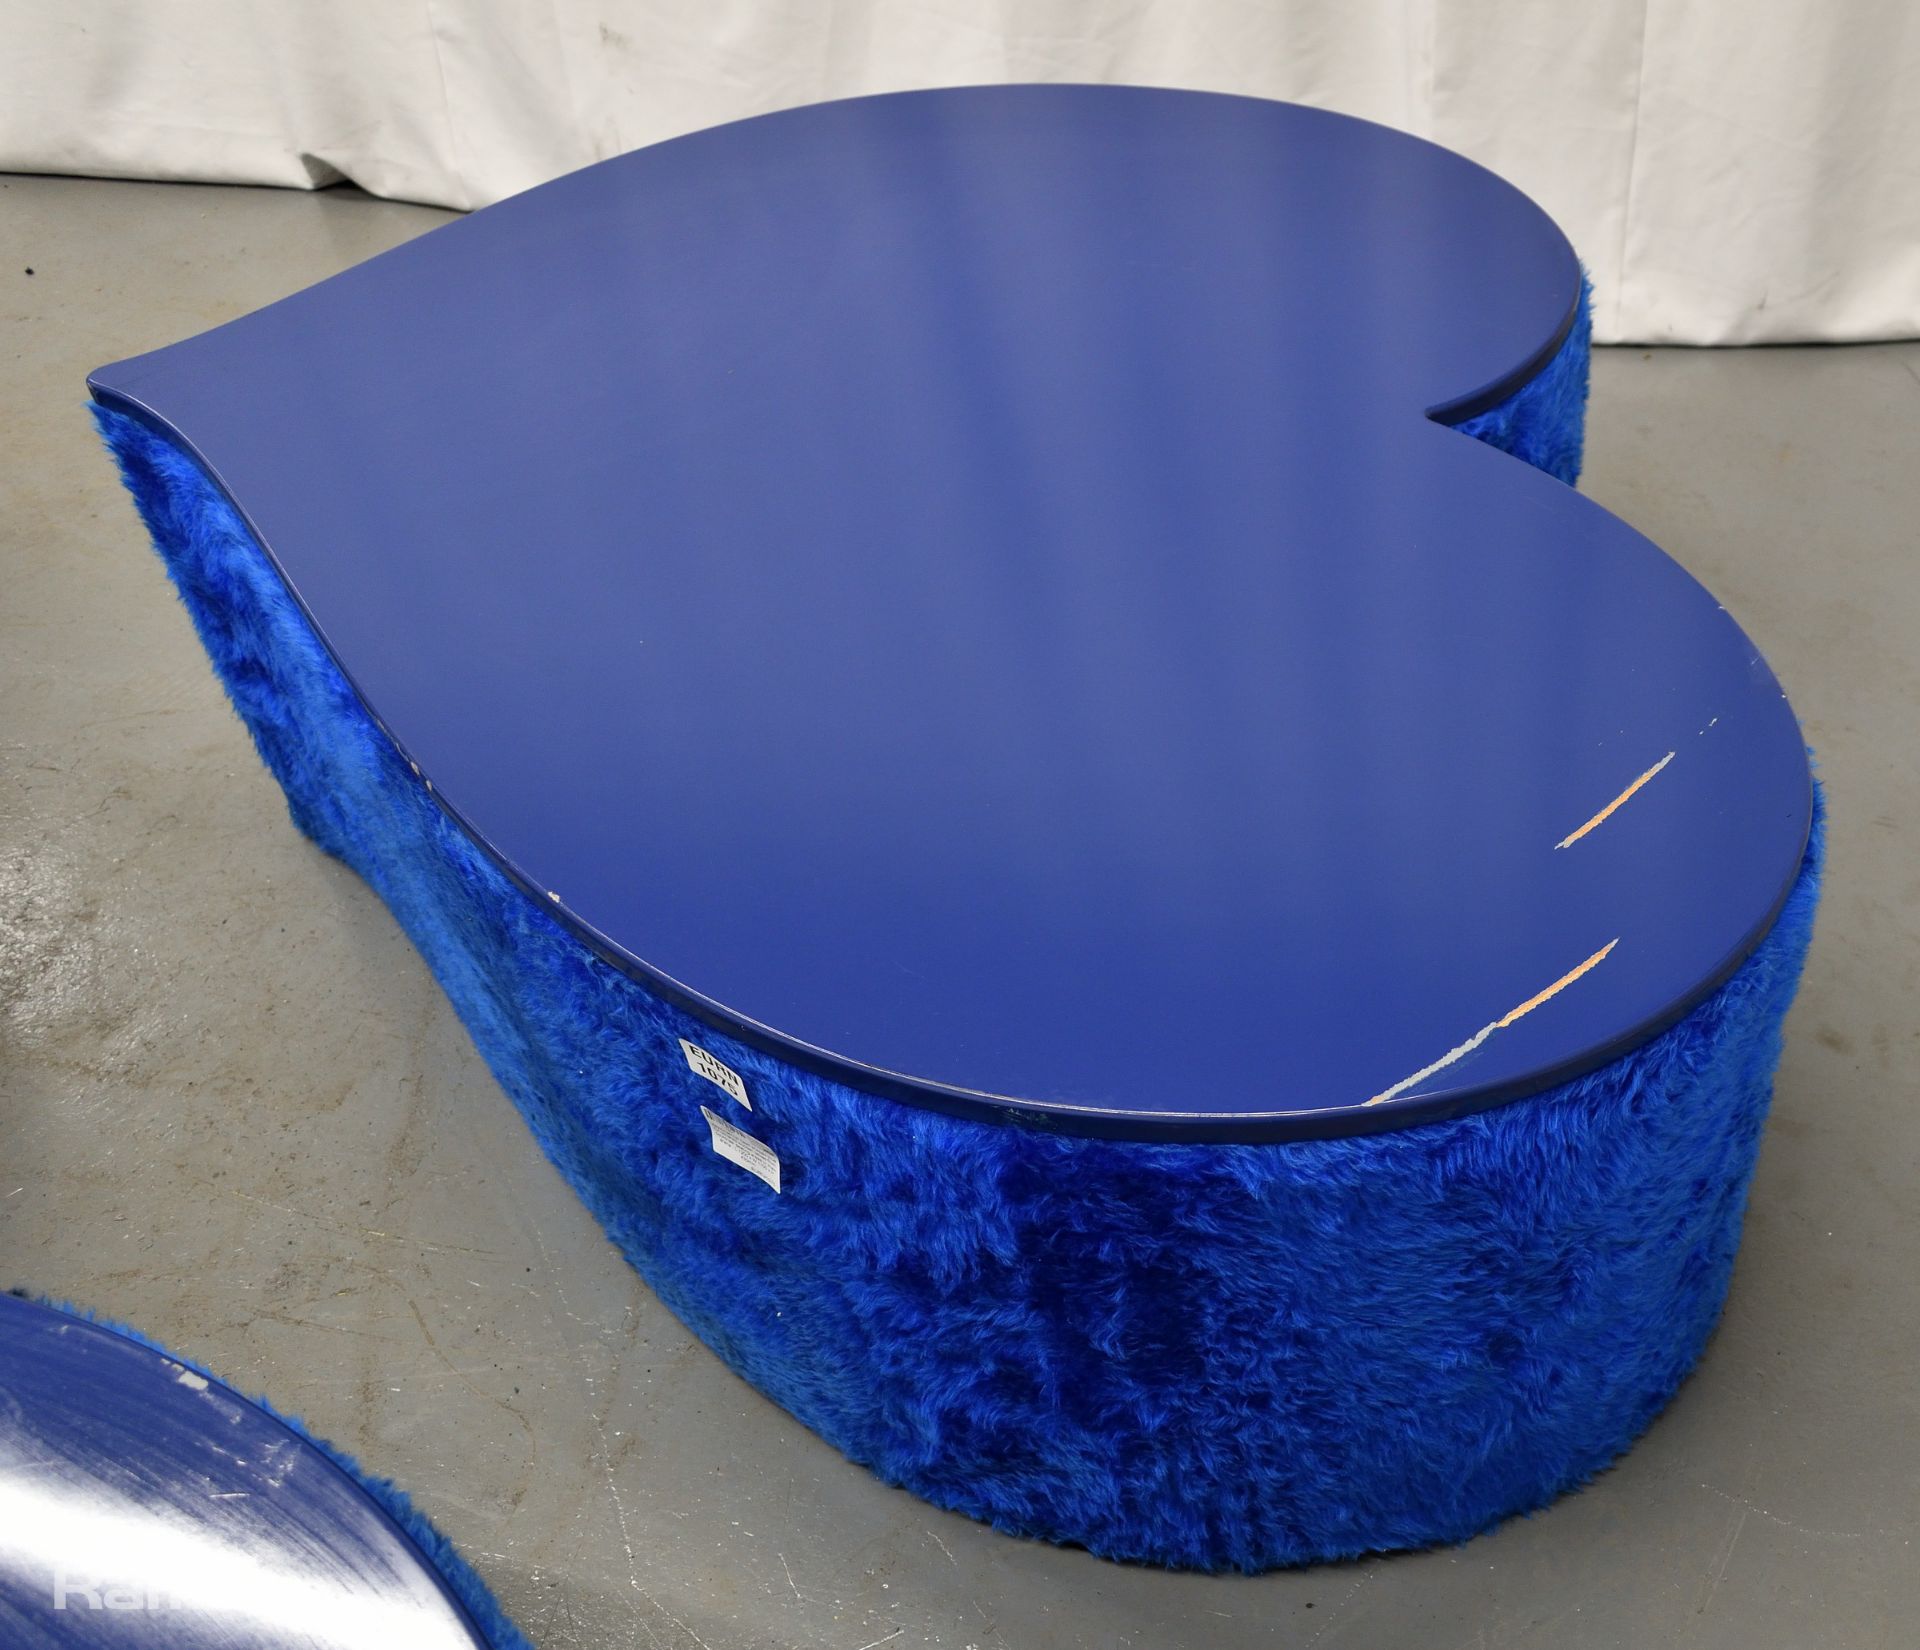 3x Asymmetrical heart shaped blue fur-covered wooden tables from countries' seating area - Image 10 of 14